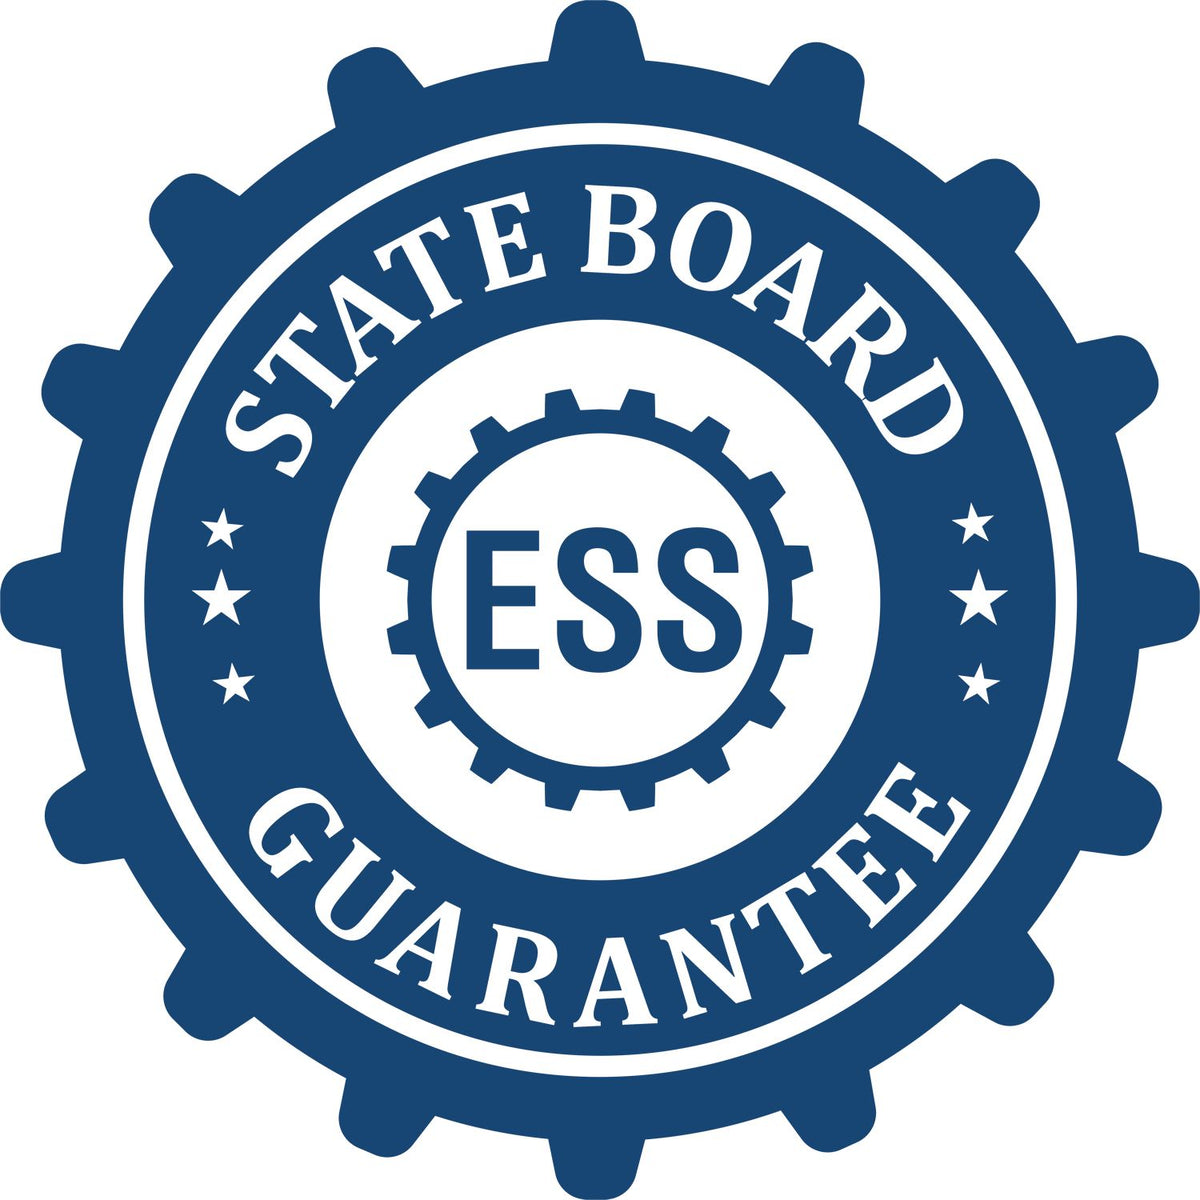 An emblem in a gear shape illustrating a state board guarantee for the State of Kansas Extended Long Reach Engineer Seal product.